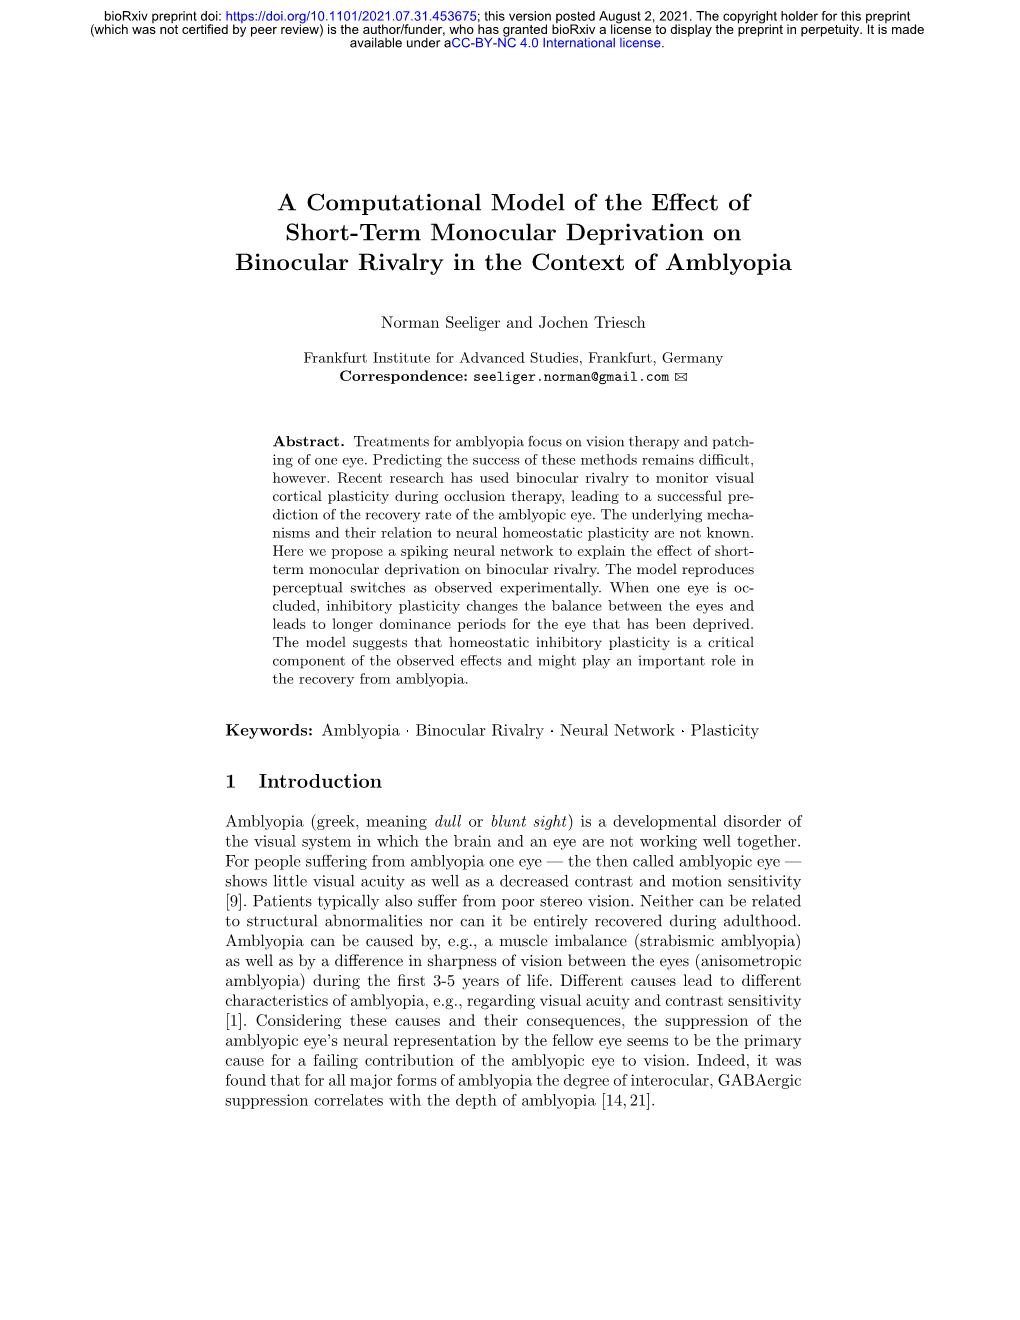 A Computational Model of the Effect of Short-Term Monocular Deprivation on Binocular Rivalry in the Context of Amblyopia